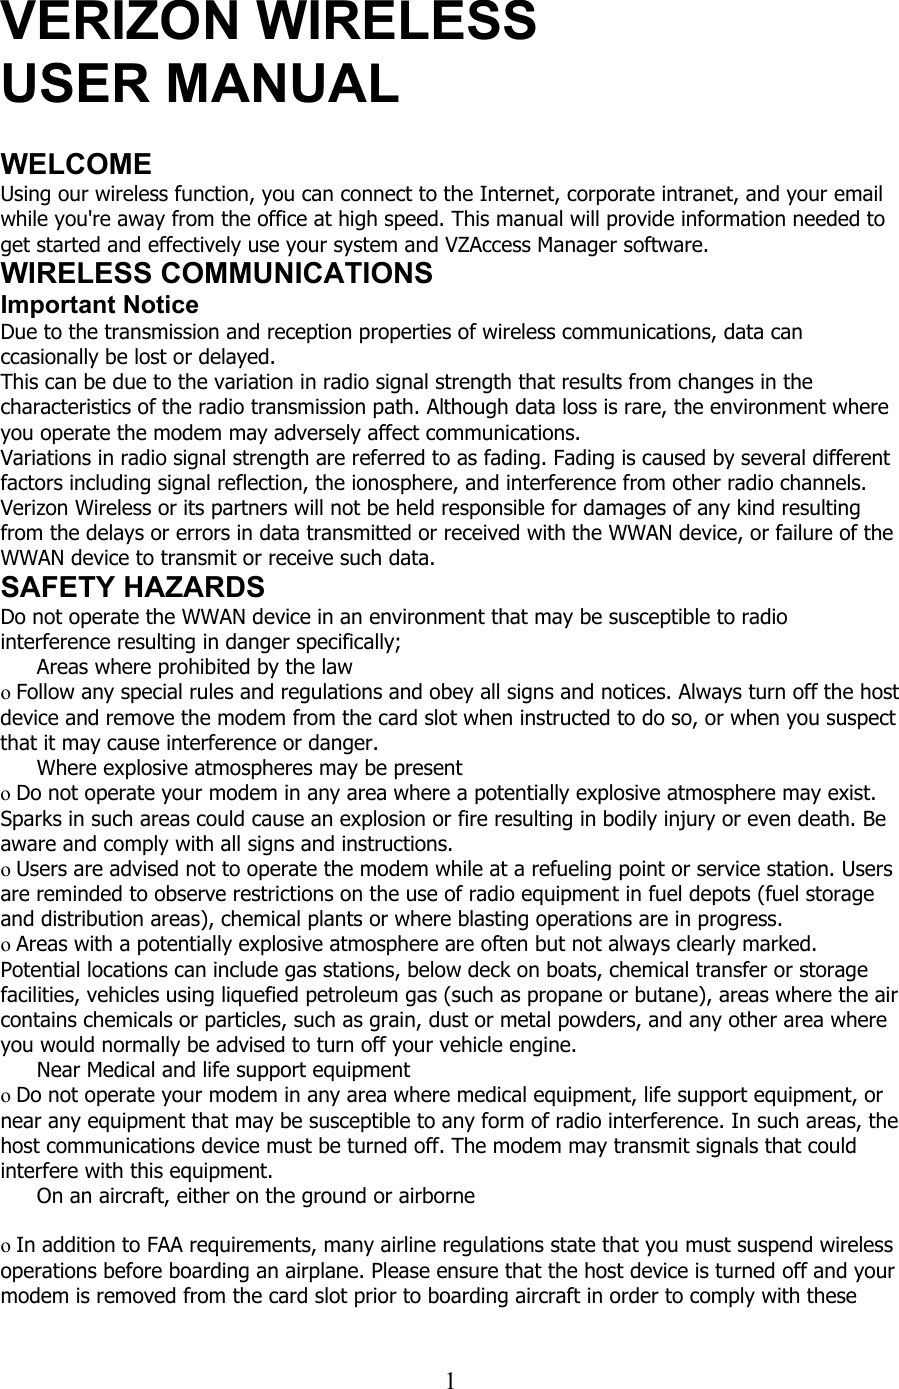  1  VERIZON WIRELESS USER MANUAL  WELCOME Using our wireless function, you can connect to the Internet, corporate intranet, and your email while you&apos;re away from the office at high speed. This manual will provide information needed to get started and effectively use your system and VZAccess Manager software. WIRELESS COMMUNICATIONS Important Notice Due to the transmission and reception properties of wireless communications, data can ccasionally be lost or delayed. This can be due to the variation in radio signal strength that results from changes in the characteristics of the radio transmission path. Although data loss is rare, the environment where you operate the modem may adversely affect communications. Variations in radio signal strength are referred to as fading. Fading is caused by several different factors including signal reflection, the ionosphere, and interference from other radio channels. Verizon Wireless or its partners will not be held responsible for damages of any kind resulting from the delays or errors in data transmitted or received with the WWAN device, or failure of the WWAN device to transmit or receive such data. SAFETY HAZARDS Do not operate the WWAN device in an environment that may be susceptible to radio interference resulting in danger specifically;  Areas where prohibited by the law  o Follow any special rules and regulations and obey all signs and notices. Always turn off the host device and remove the modem from the card slot when instructed to do so, or when you suspect that it may cause interference or danger.  Where explosive atmospheres may be present o Do not operate your modem in any area where a potentially explosive atmosphere may exist. Sparks in such areas could cause an explosion or fire resulting in bodily injury or even death. Be aware and comply with all signs and instructions. o Users are advised not to operate the modem while at a refueling point or service station. Users are reminded to observe restrictions on the use of radio equipment in fuel depots (fuel storage and distribution areas), chemical plants or where blasting operations are in progress. o Areas with a potentially explosive atmosphere are often but not always clearly marked. Potential locations can include gas stations, below deck on boats, chemical transfer or storage facilities, vehicles using liquefied petroleum gas (such as propane or butane), areas where the air contains chemicals or particles, such as grain, dust or metal powders, and any other area where you would normally be advised to turn off your vehicle engine.  Near Medical and life support equipment o Do not operate your modem in any area where medical equipment, life support equipment, or near any equipment that may be susceptible to any form of radio interference. In such areas, the host communications device must be turned off. The modem may transmit signals that could interfere with this equipment.   On an aircraft, either on the ground or airborne  o In addition to FAA requirements, many airline regulations state that you must suspend wireless operations before boarding an airplane. Please ensure that the host device is turned off and your modem is removed from the card slot prior to boarding aircraft in order to comply with these 